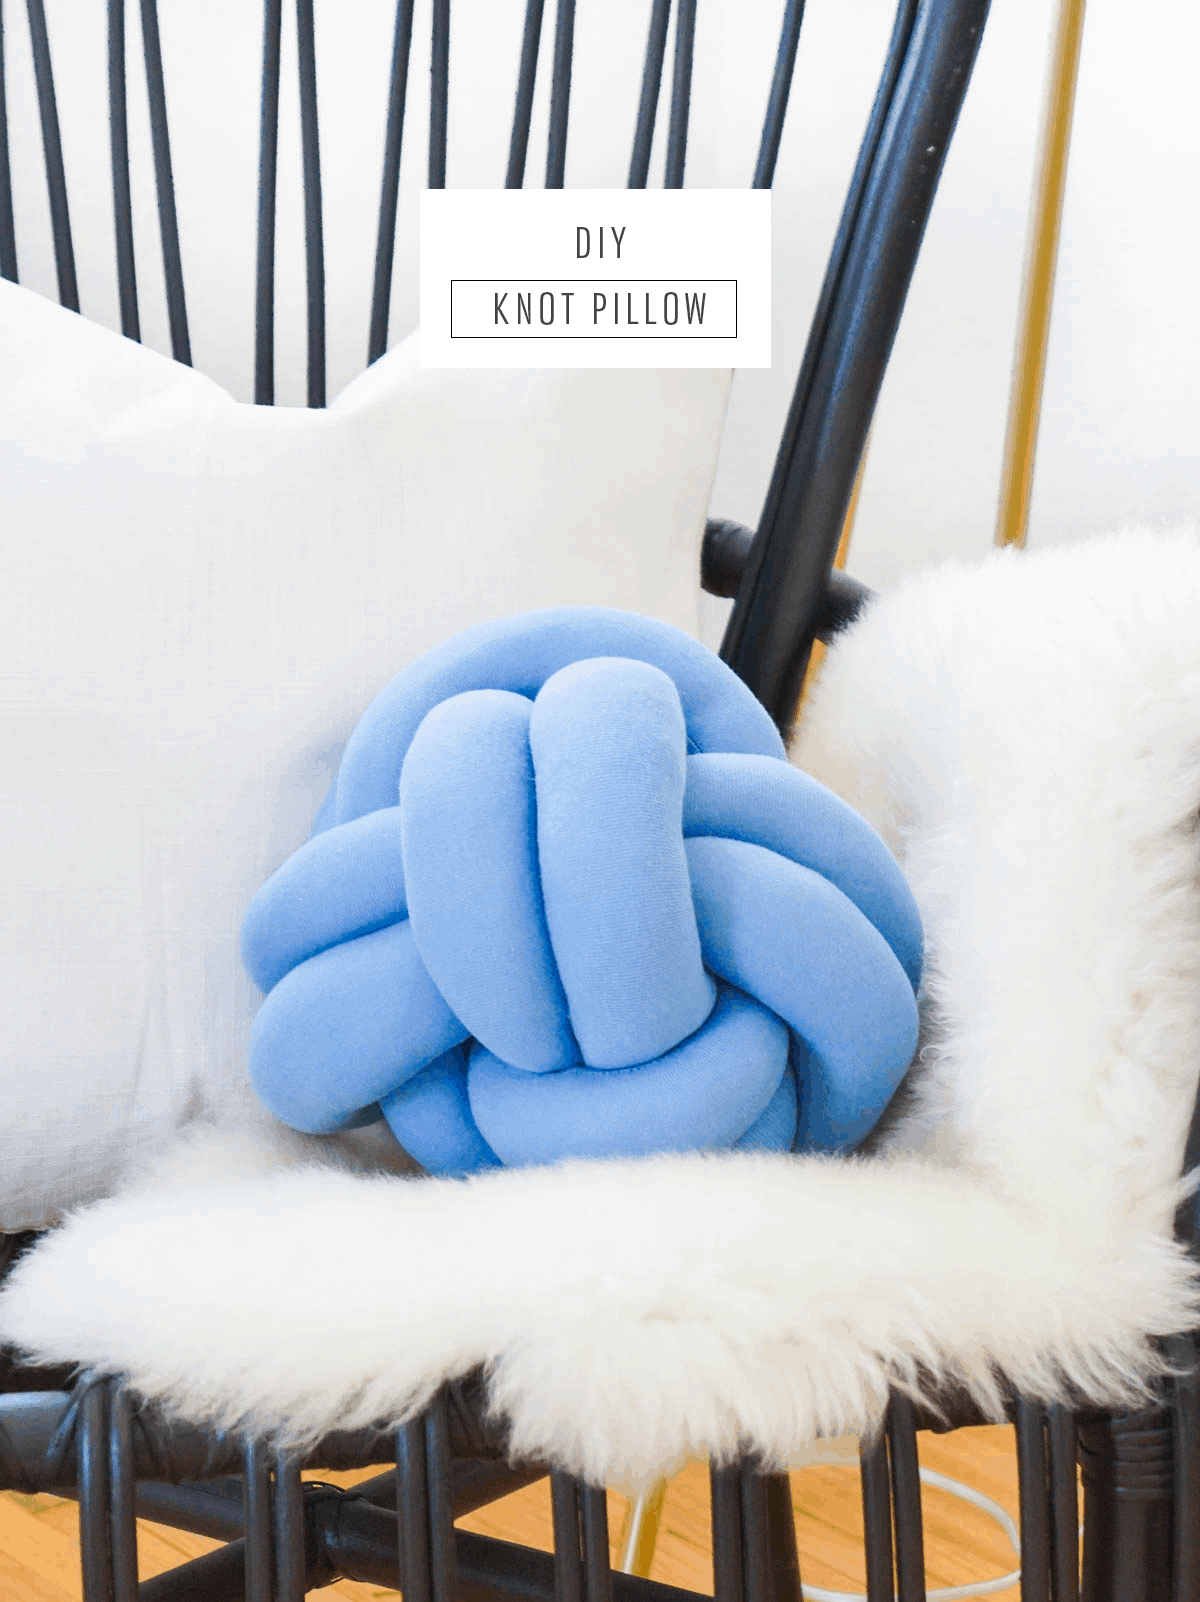 How To Make A DIY Knot Pillow Instructions | Sugar & Cloth - How To Make A DIY Knot Pillow Instructions | Sugar & Cloth -   18 diy Pillows decorative ideas